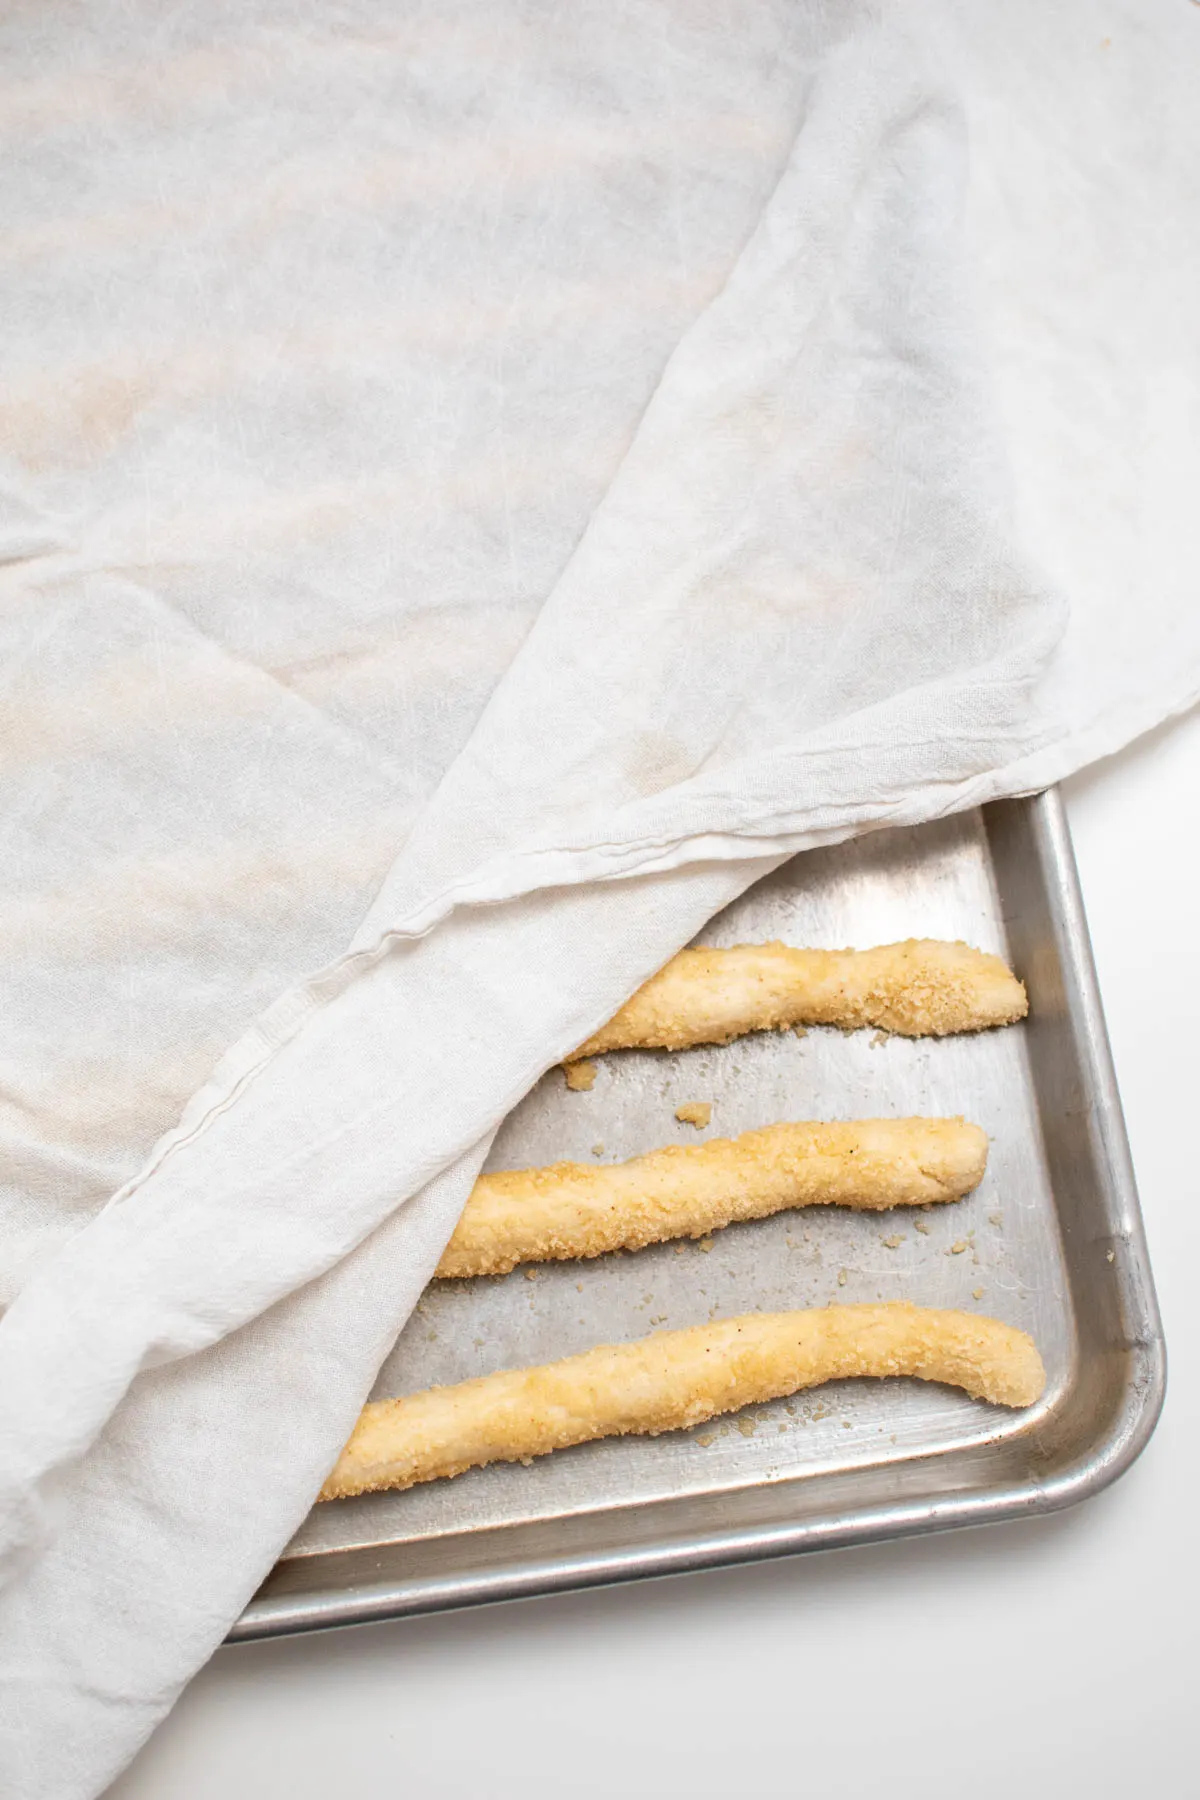 Uncooked breadsticks on baking pan partially covered with white tea towel.